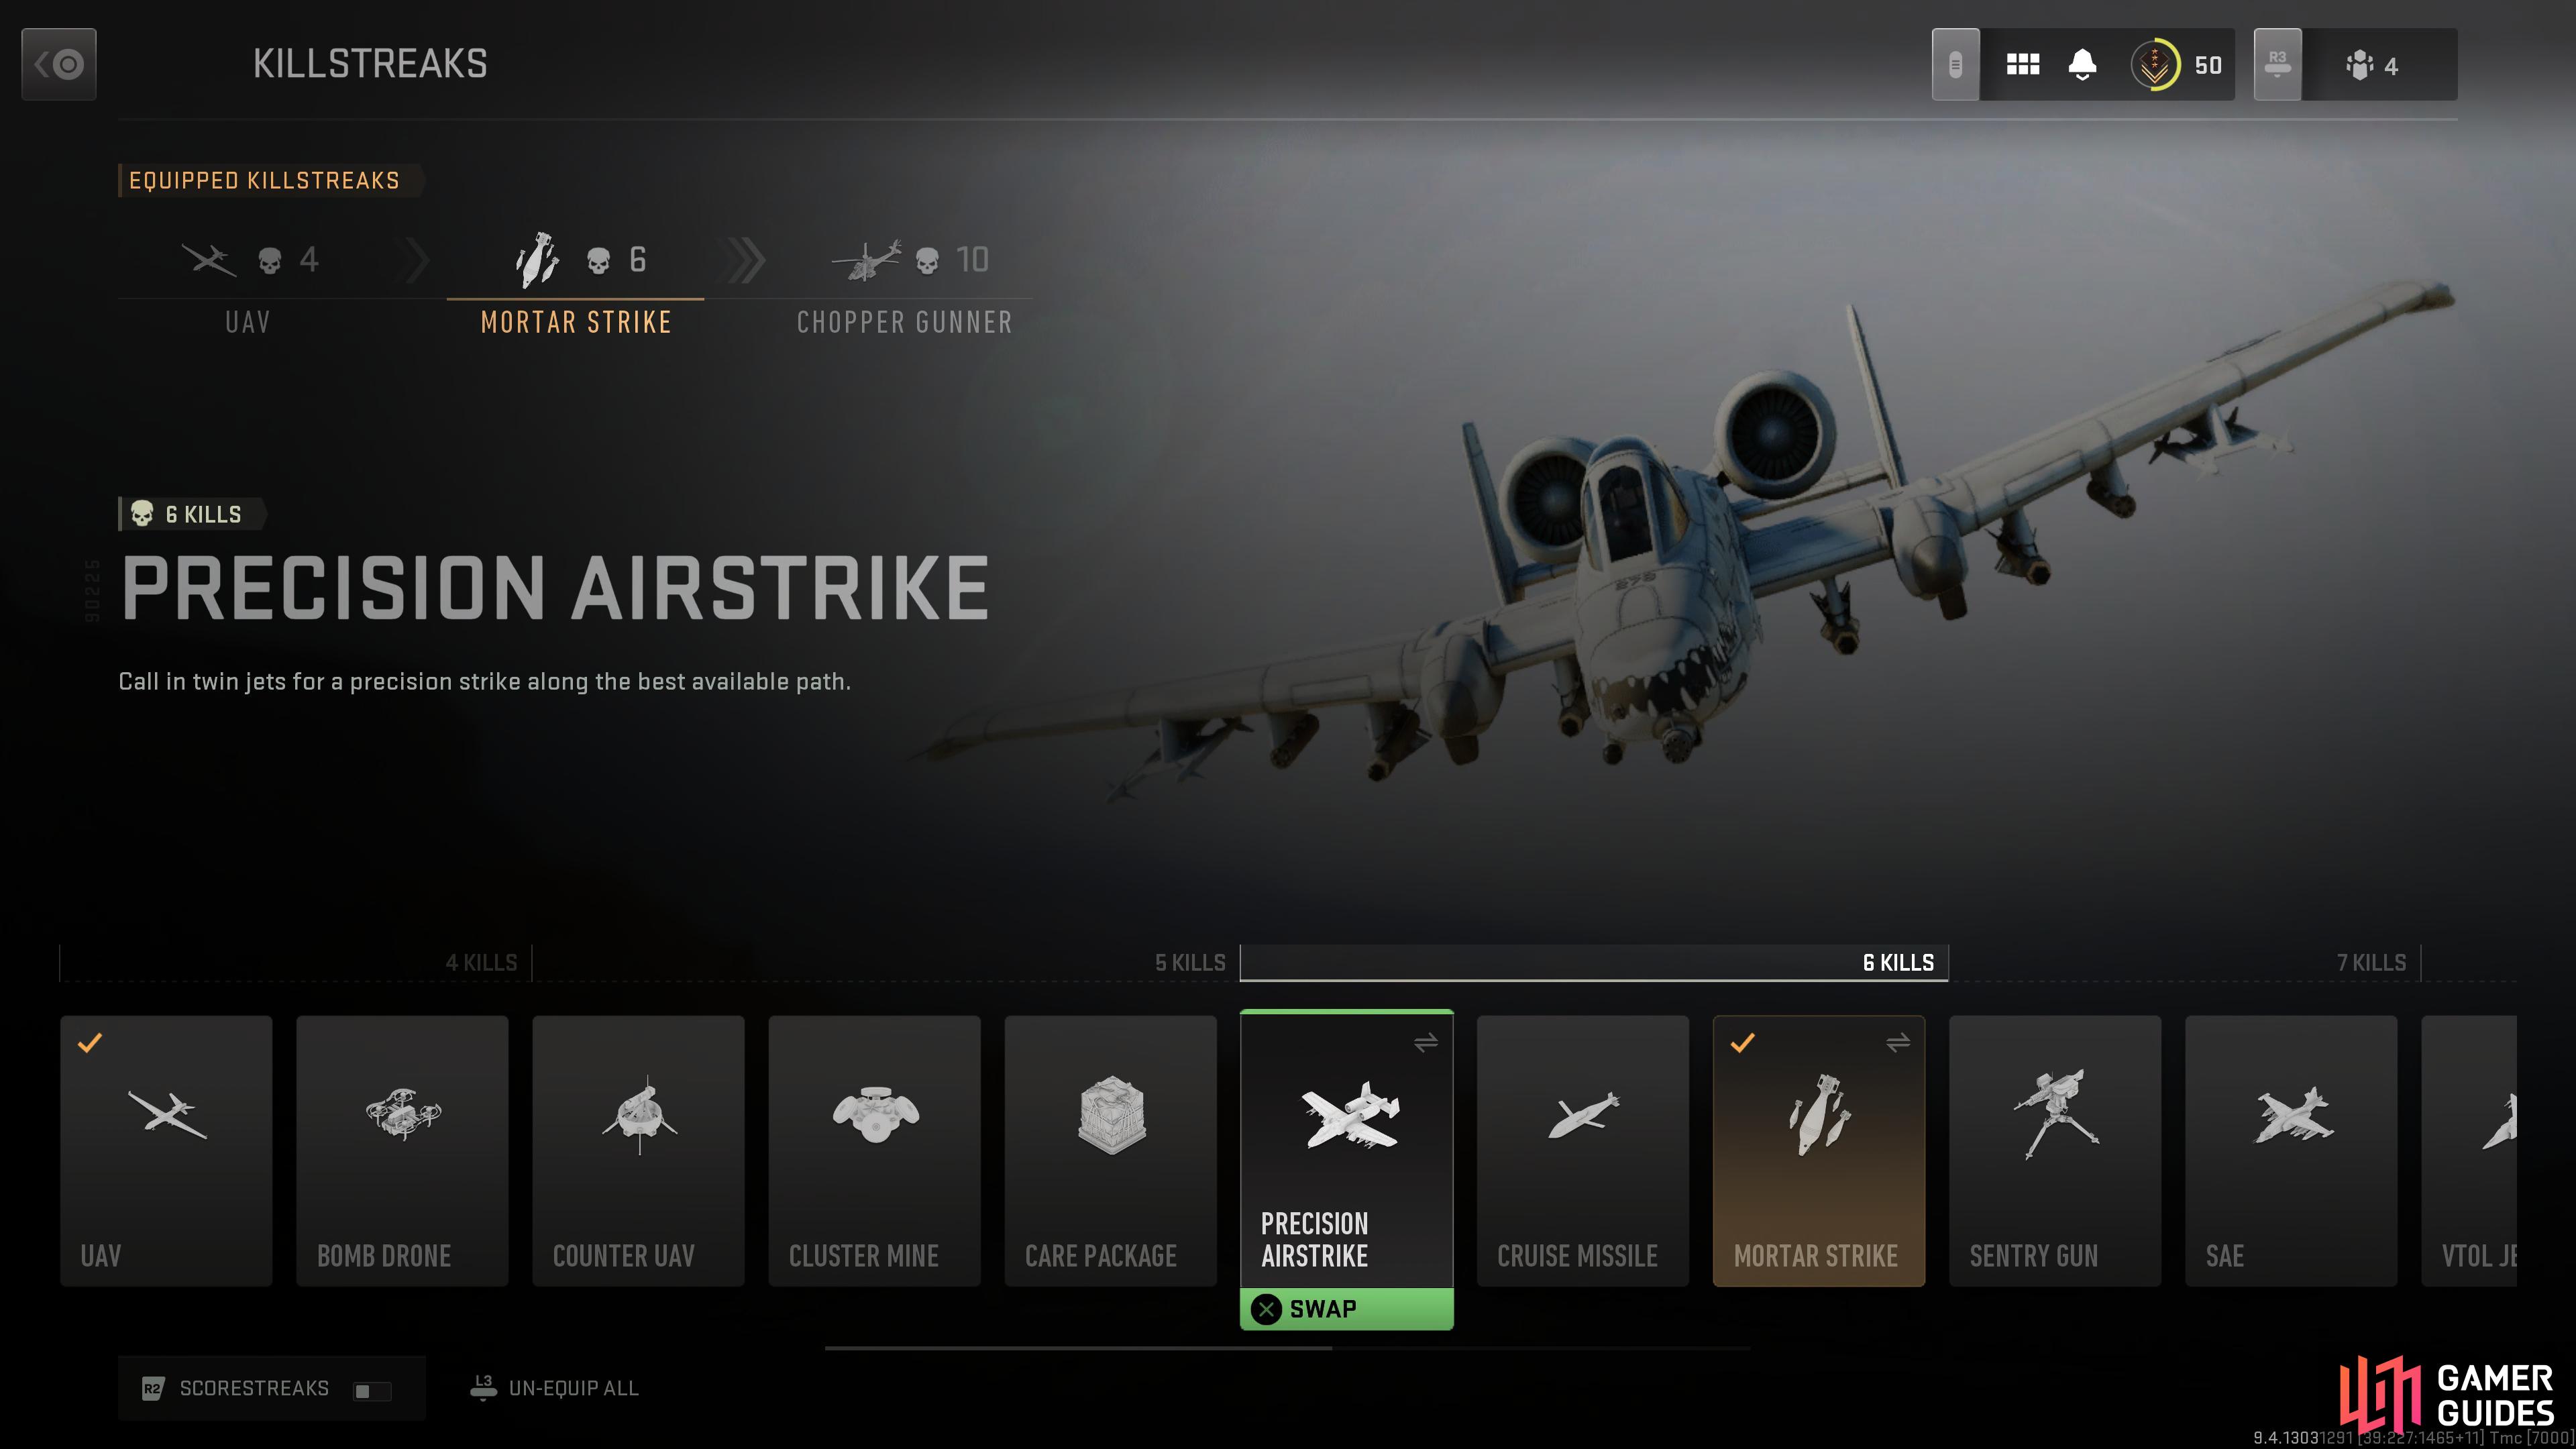 There are 19 Killstreaks to choose from.